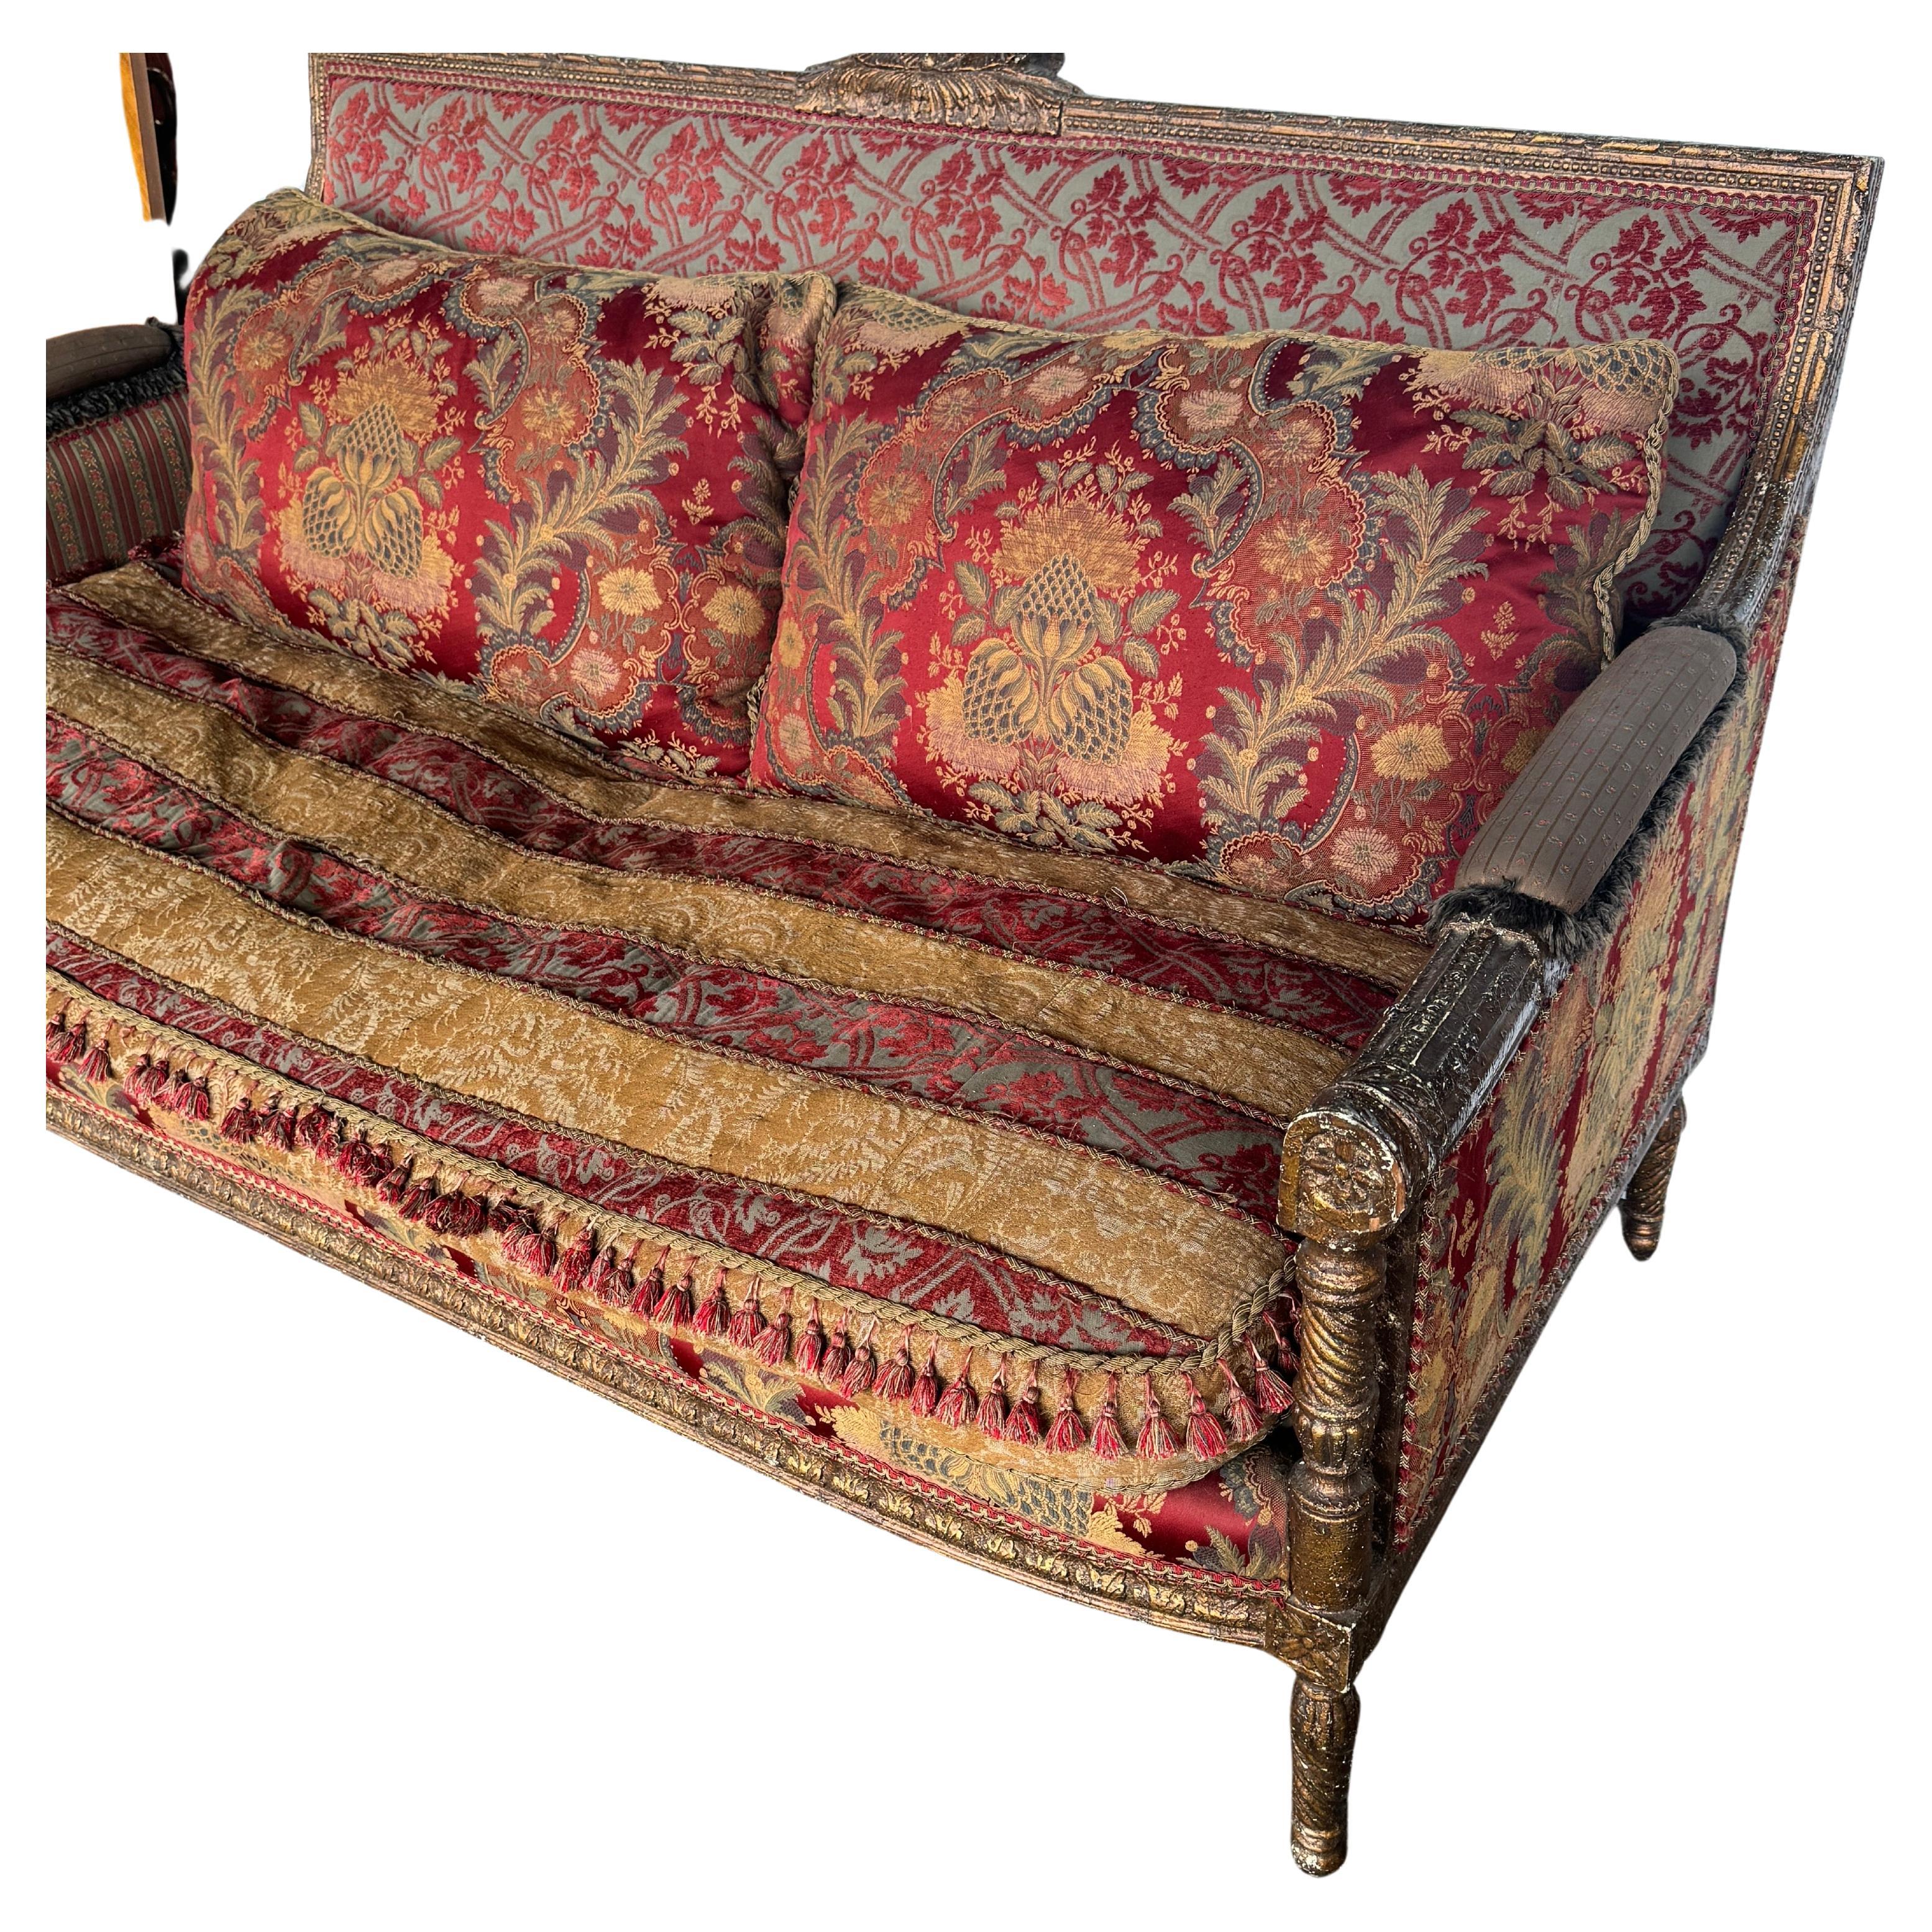 Large, cozy and impressive sofa from the Carol Hicks Bolton Collection. 
This collection emphasized ornate antique elements and rich fabrics. The details on this vintage piece are exquisite including high end fabrics and tassels. This sofa is